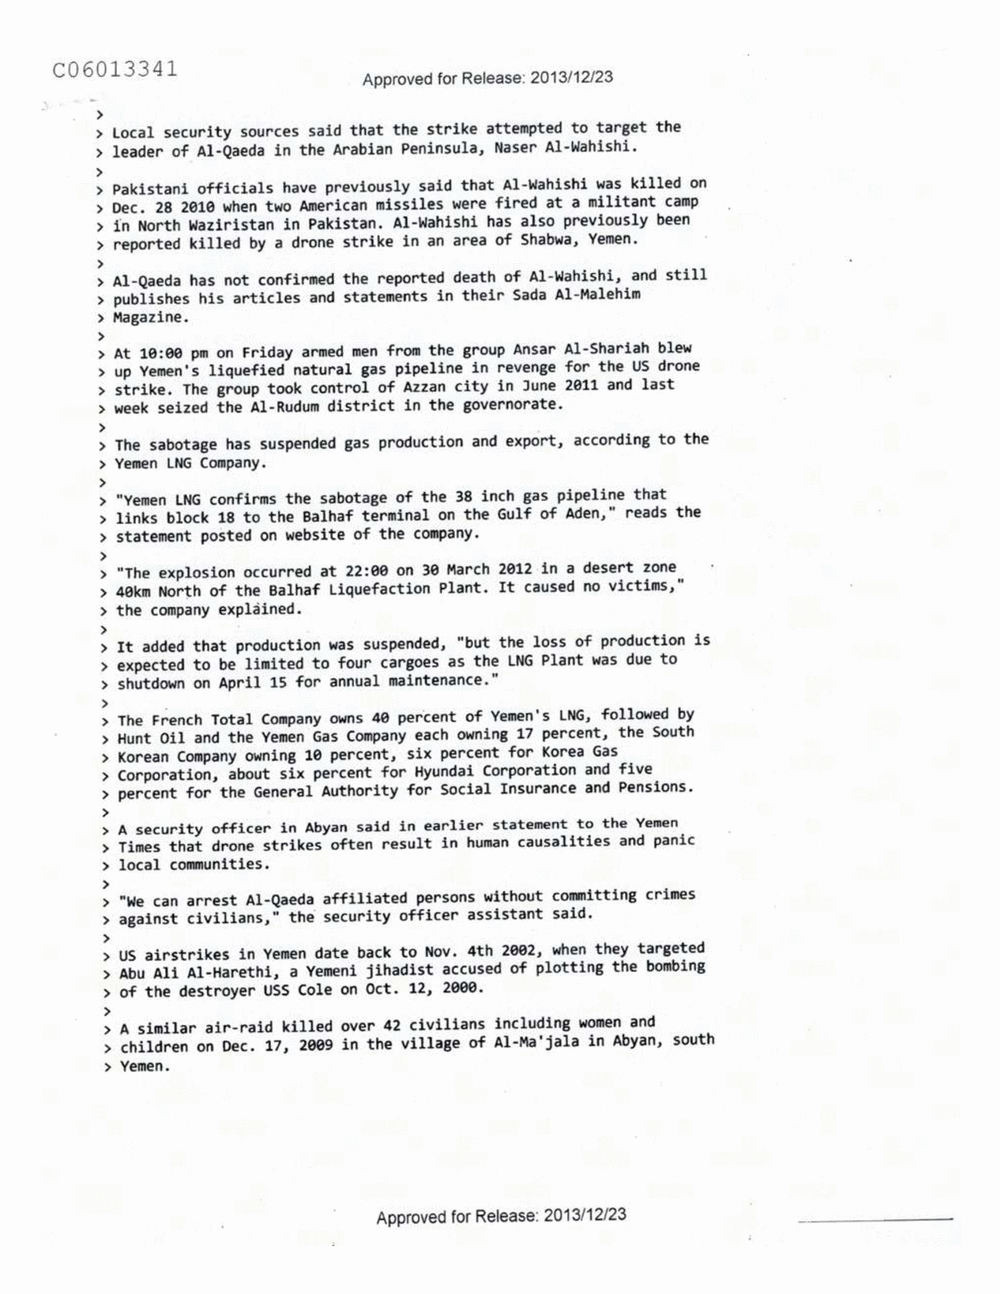 Page 249 from Email Correspondence Between Reporters and CIA Flacks